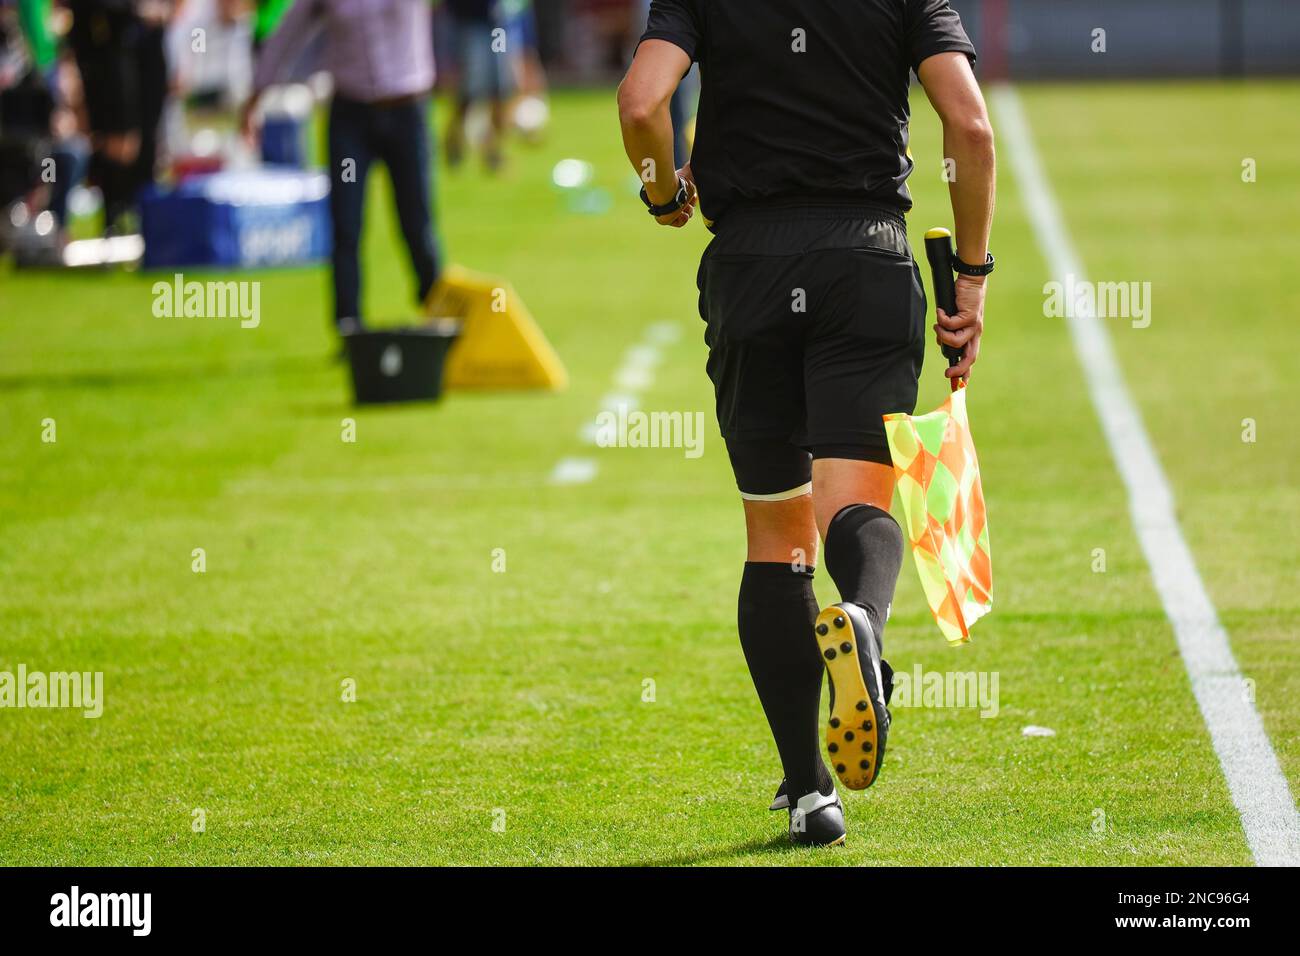 Sideline referee runs during soccer match. Stock Photo